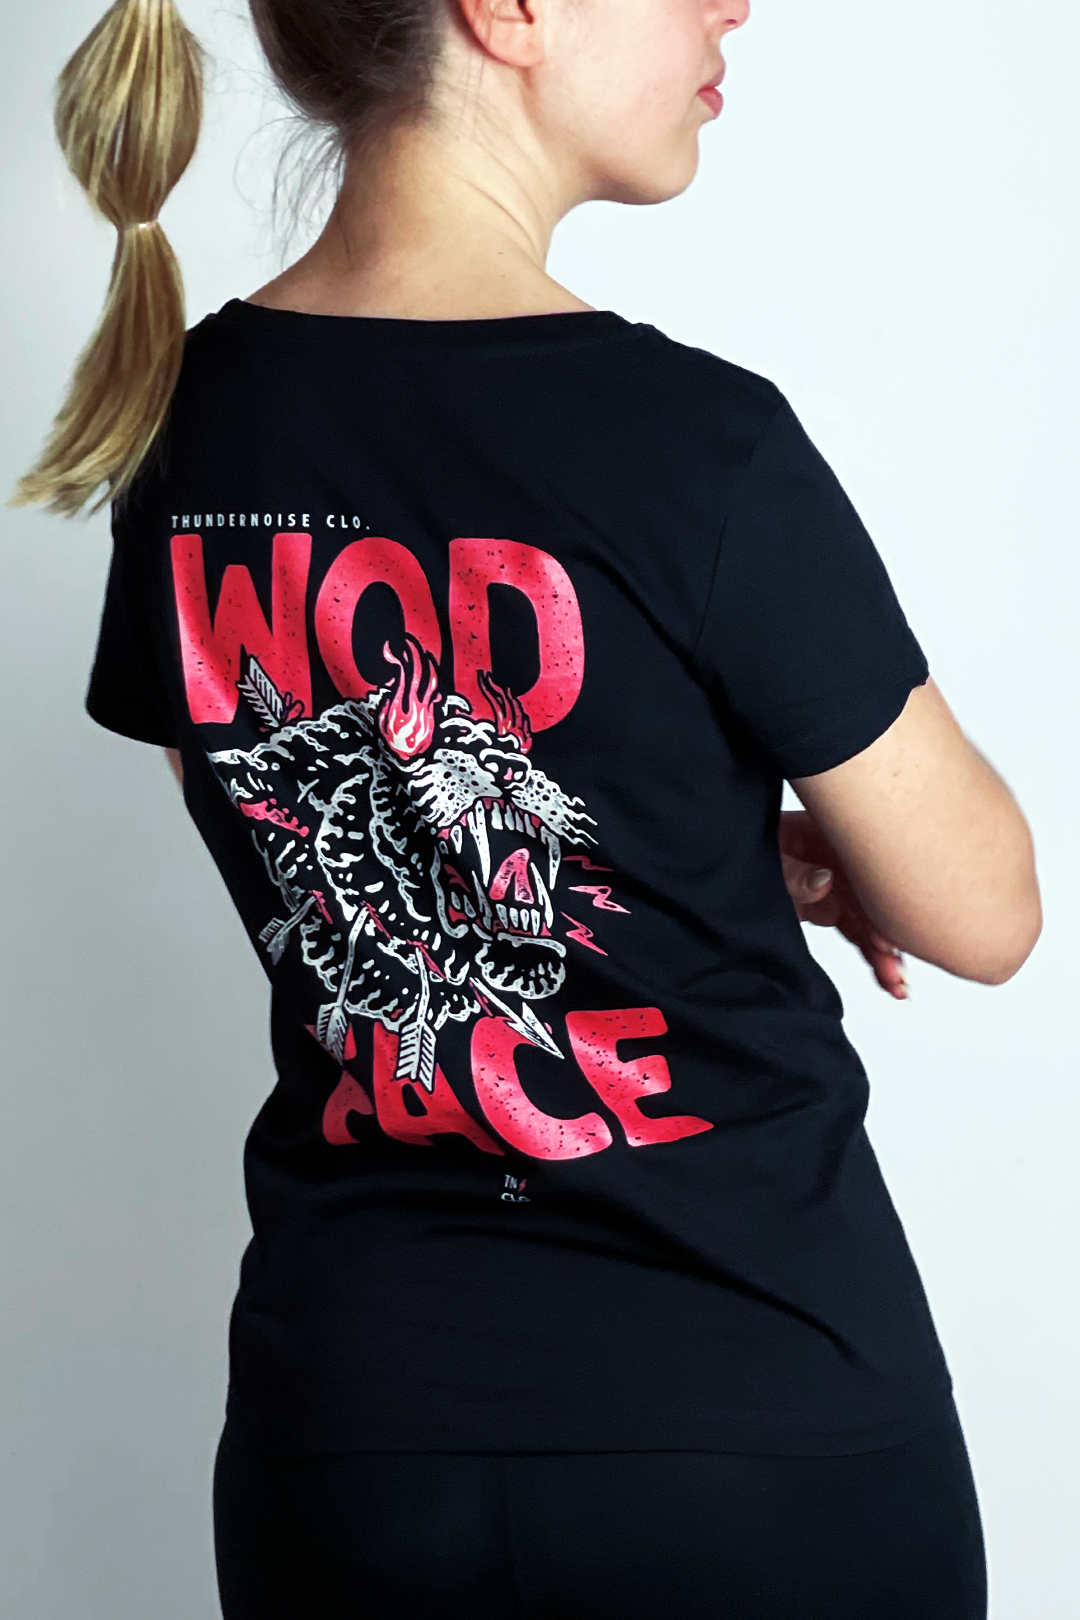 Wod Face (mujer)